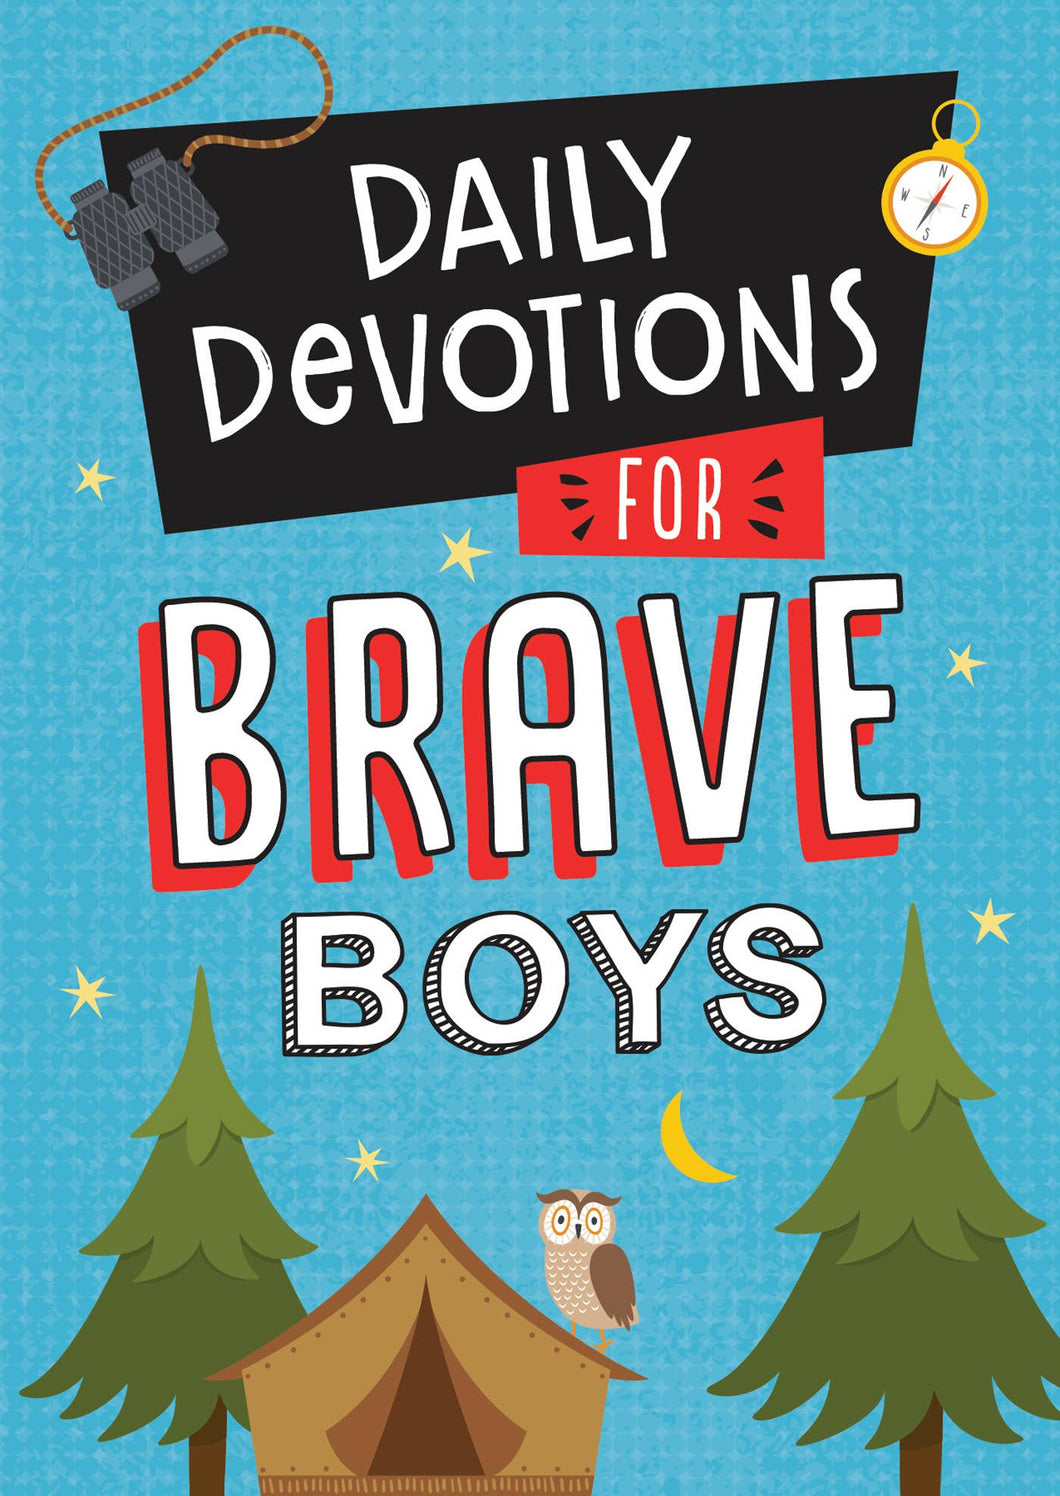 Book: Daily Devotions for Brave Boys